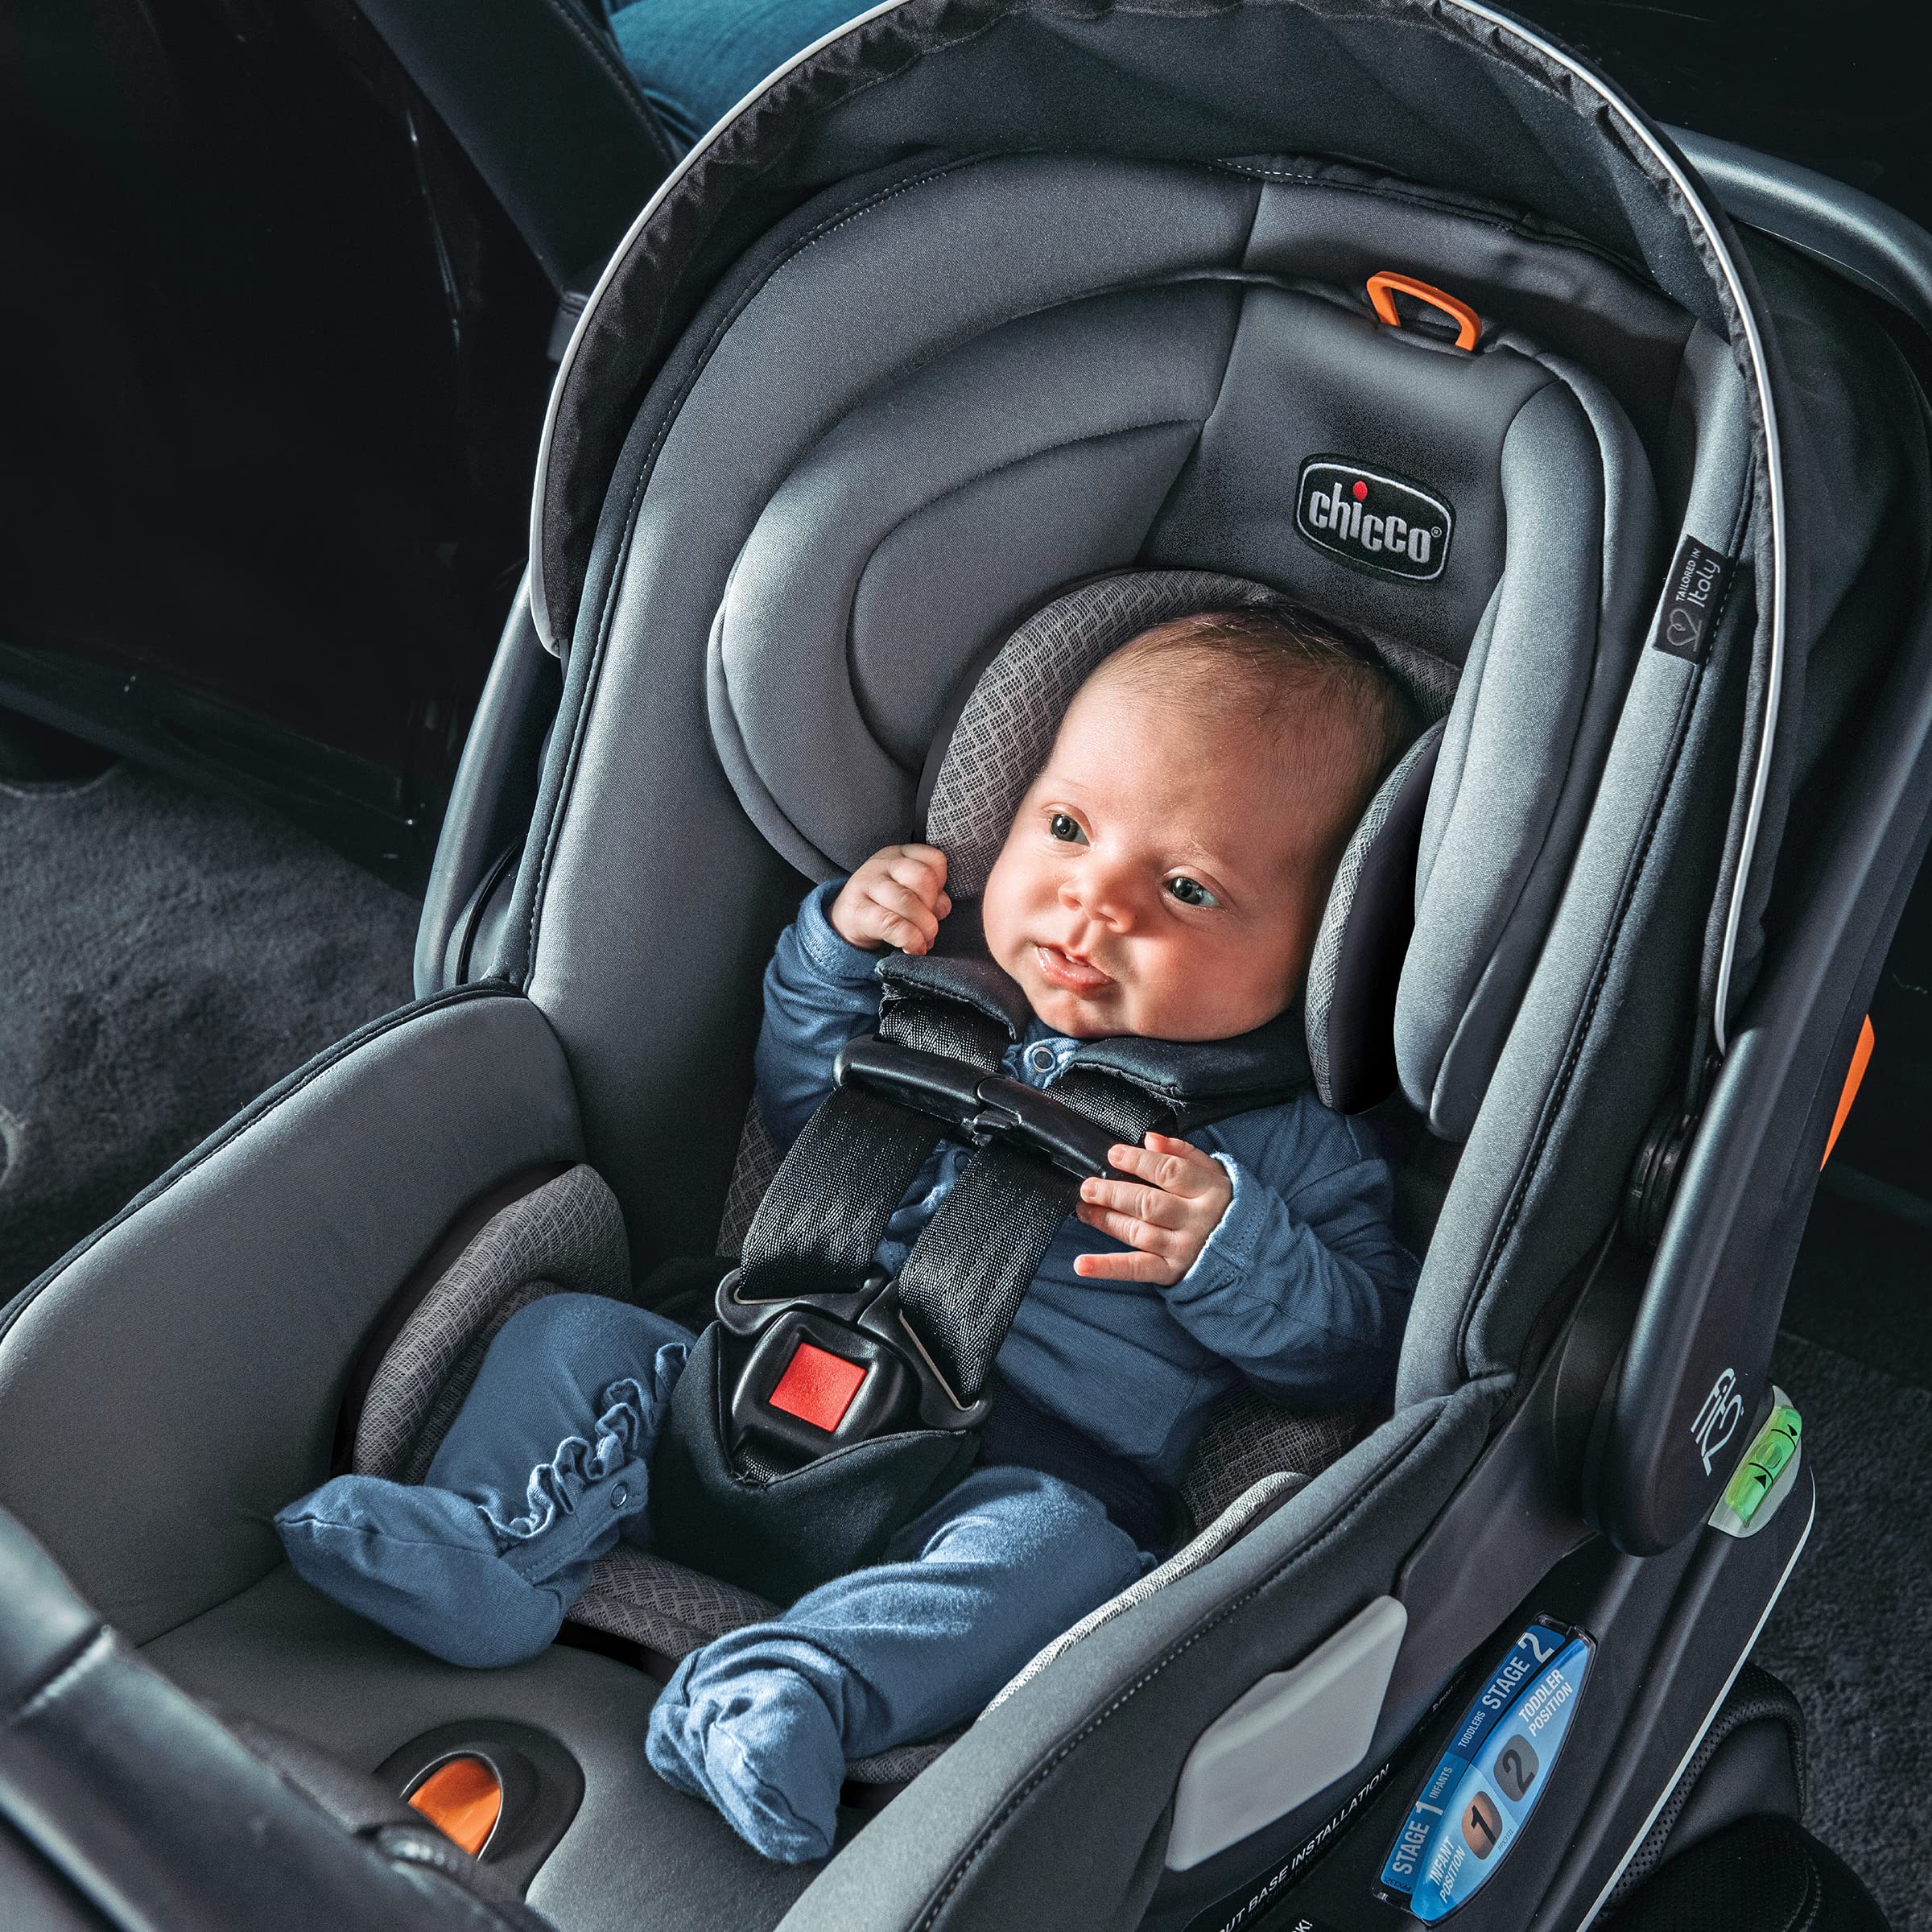 Chicco Fit2 Adapt Infant and Toddler Car Seat and Base, Rear-Facing Seat for Infants and Toddlers 4-35 lbs., Includes Infant Head and Body Support, Compatible with Chicco Strollers | Ember/Black